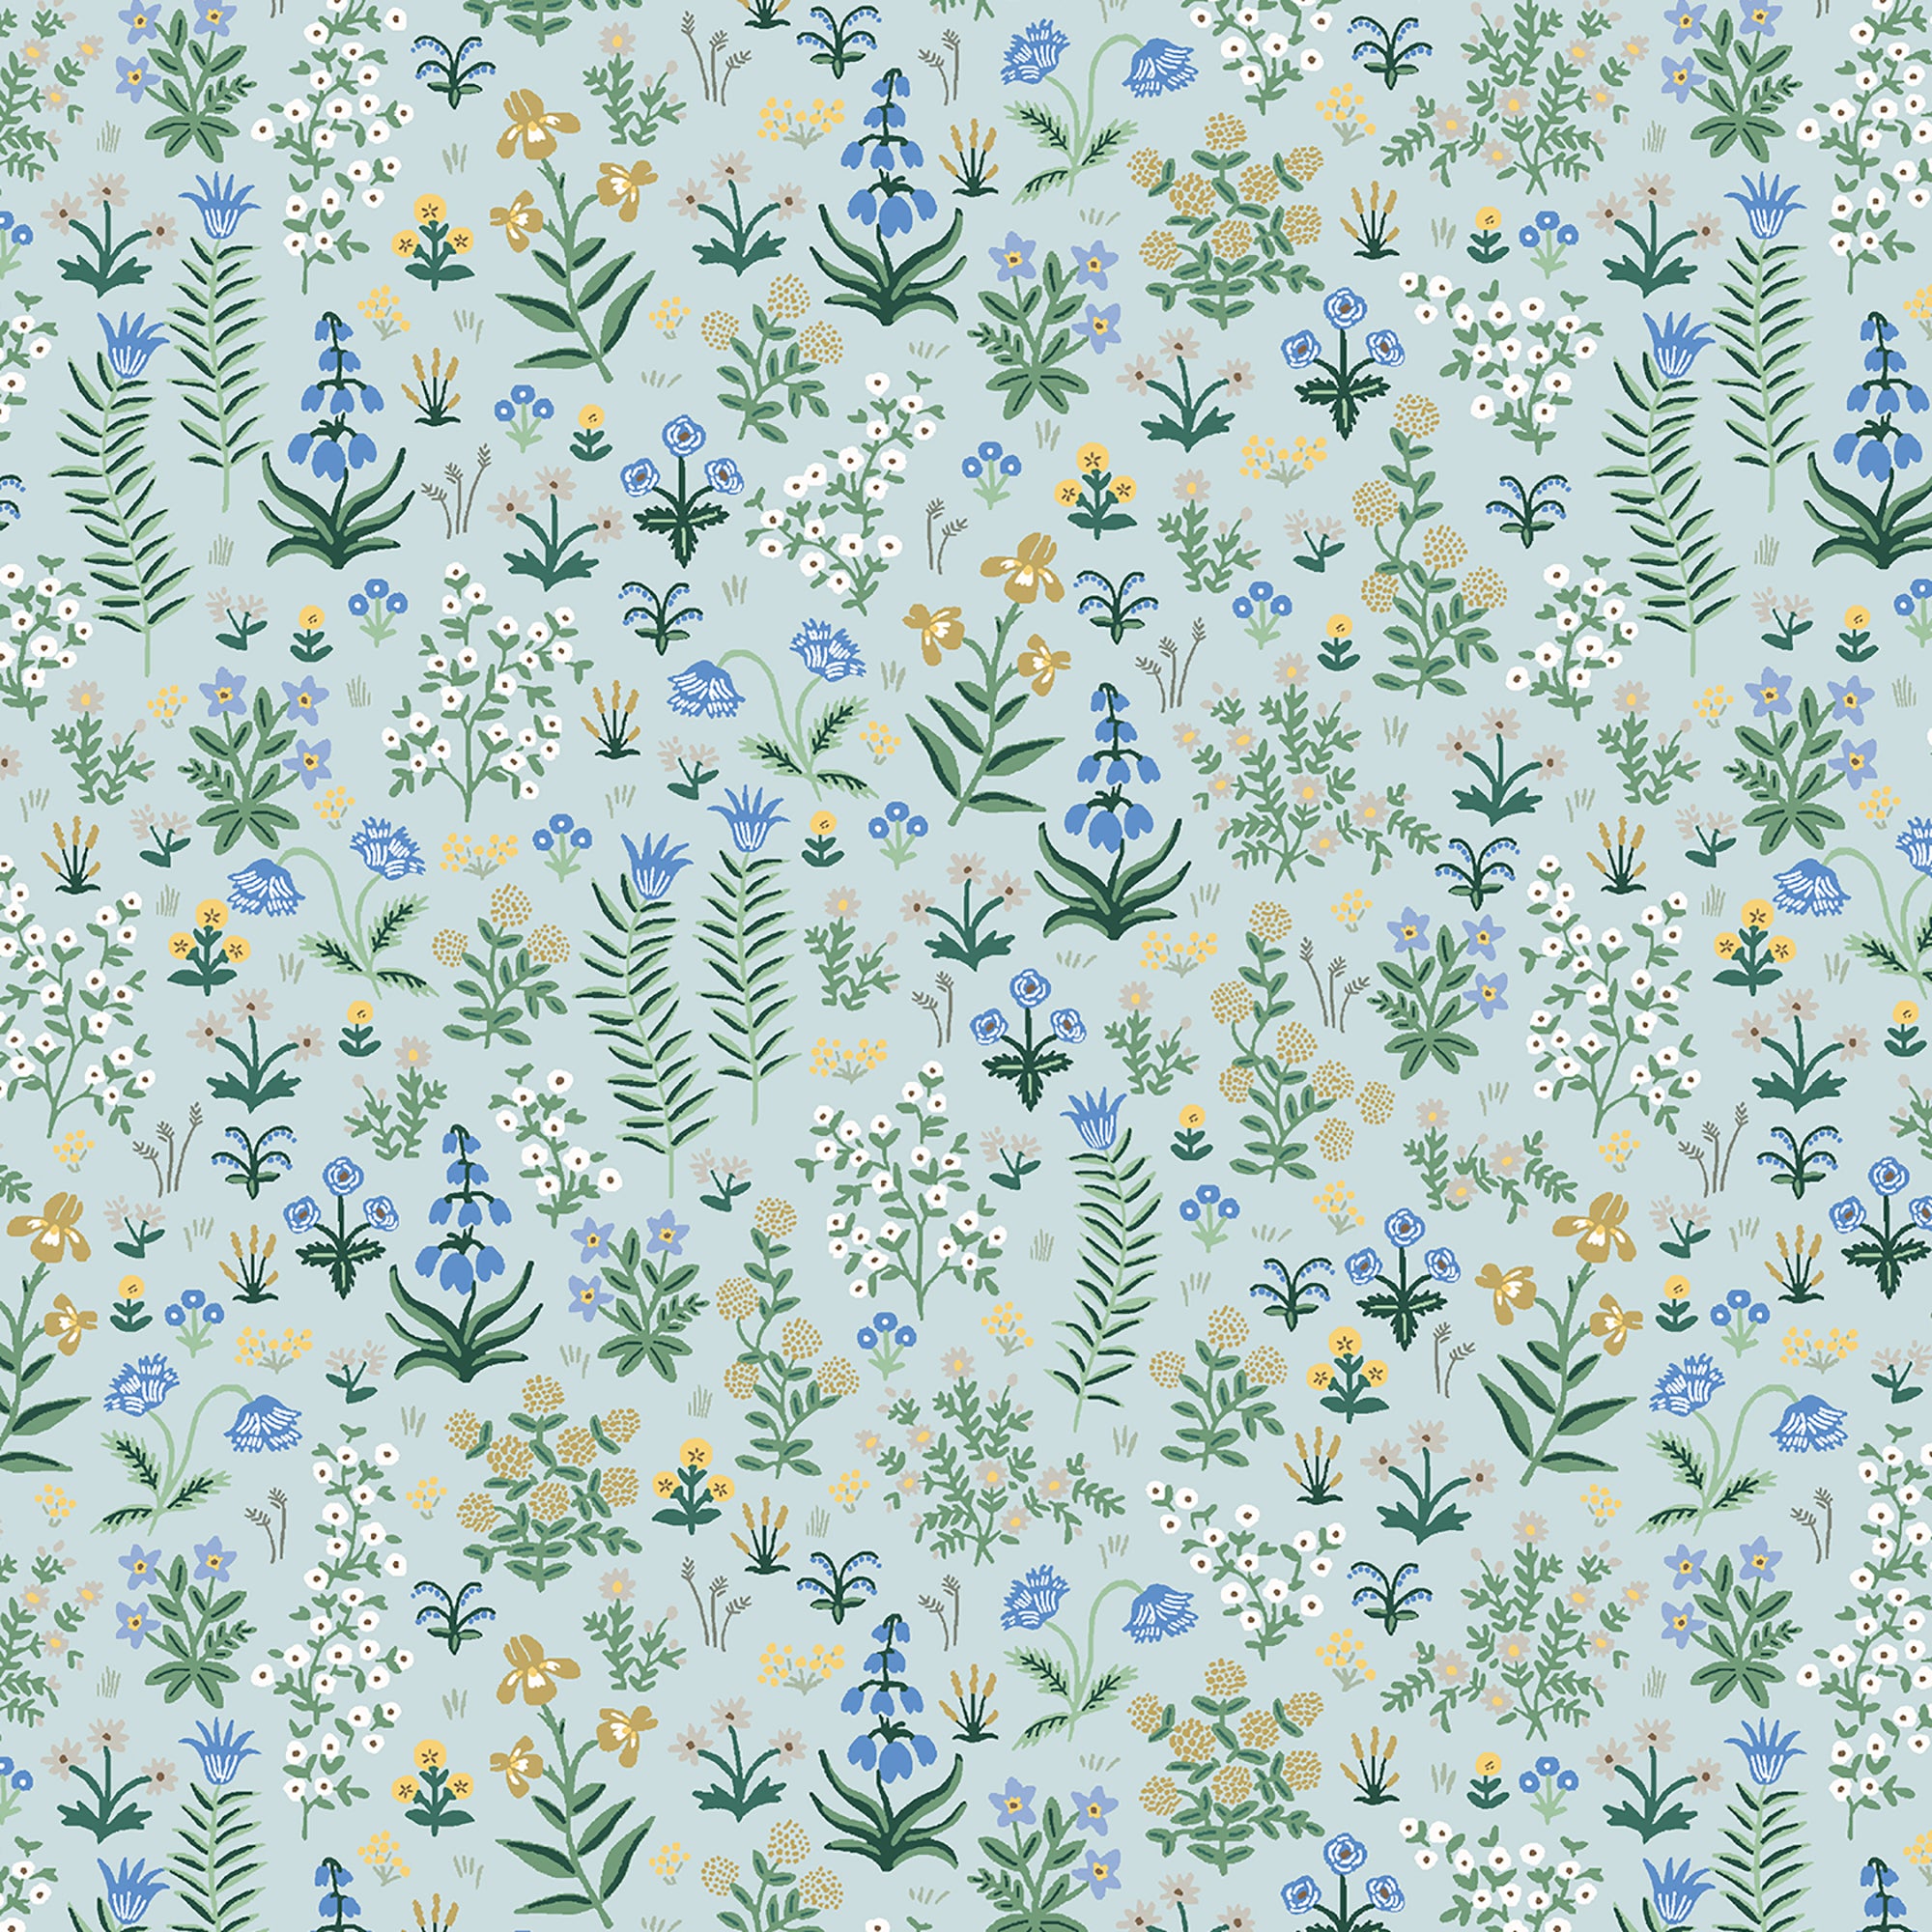 Camont - Menagerie Garden Mint Fabric